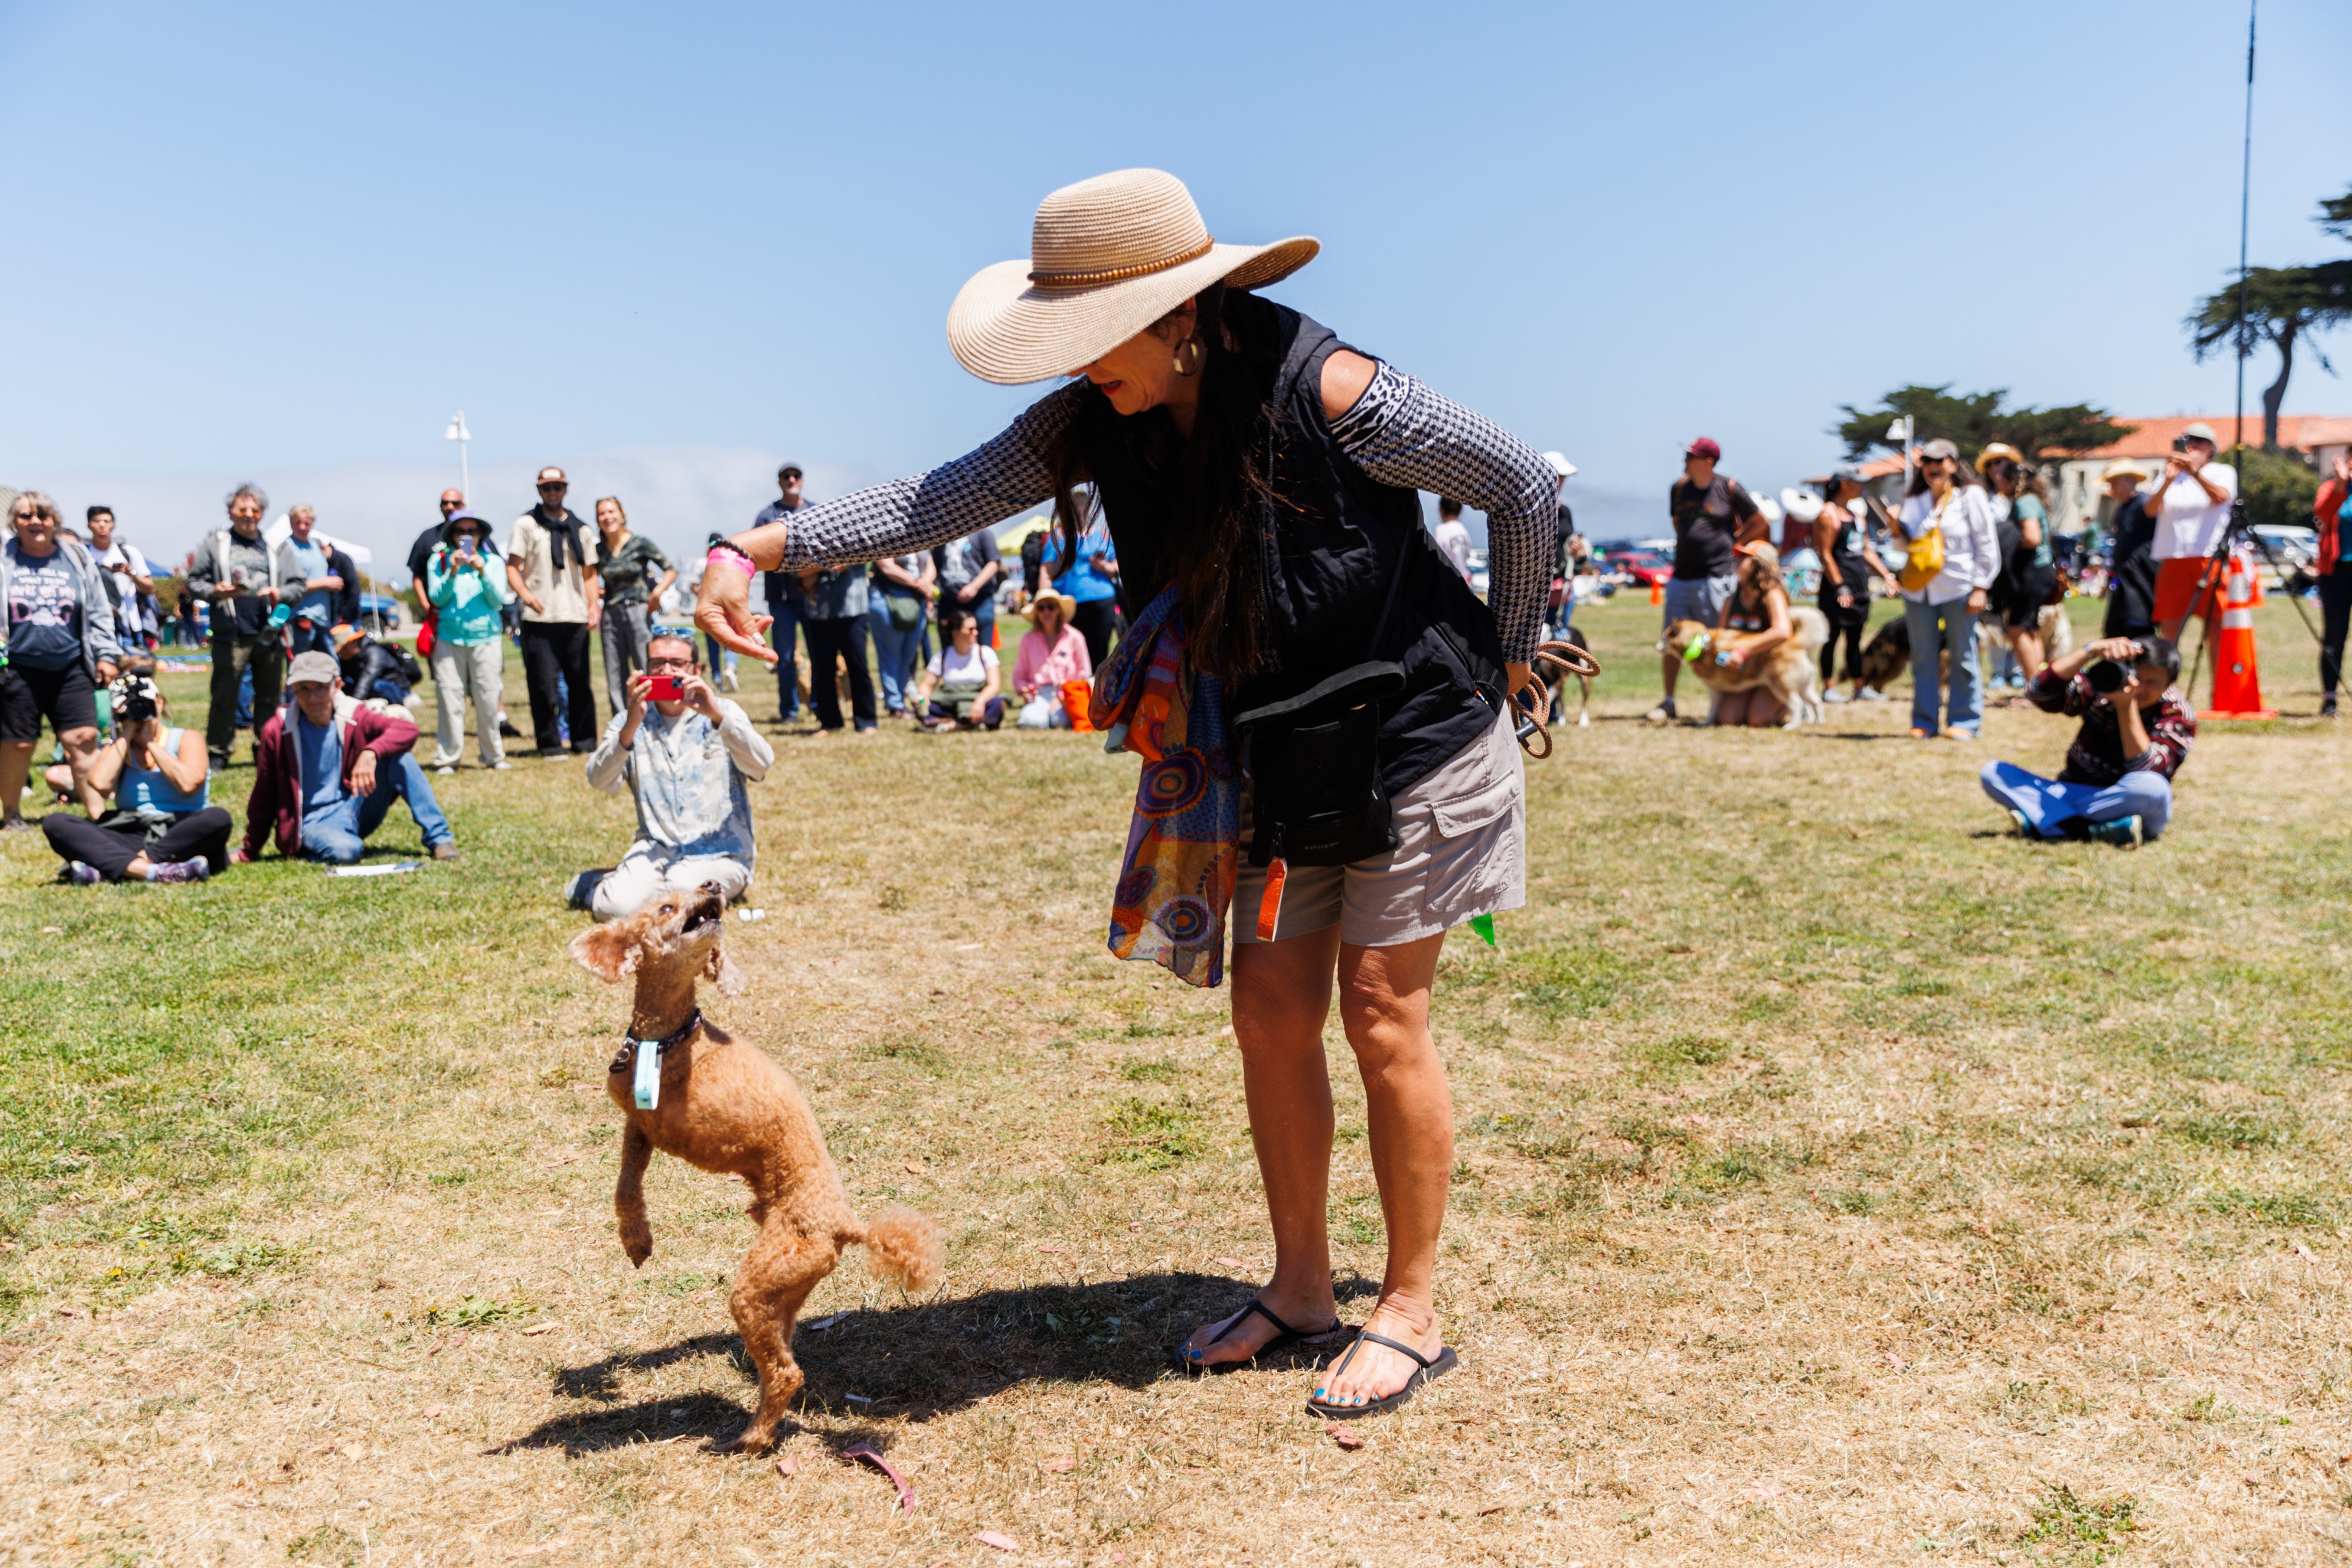 A woman in a large hat is holding a treat and guiding a small brown dog to jump. People are gathered in the background, some taking photos or watching attentively.